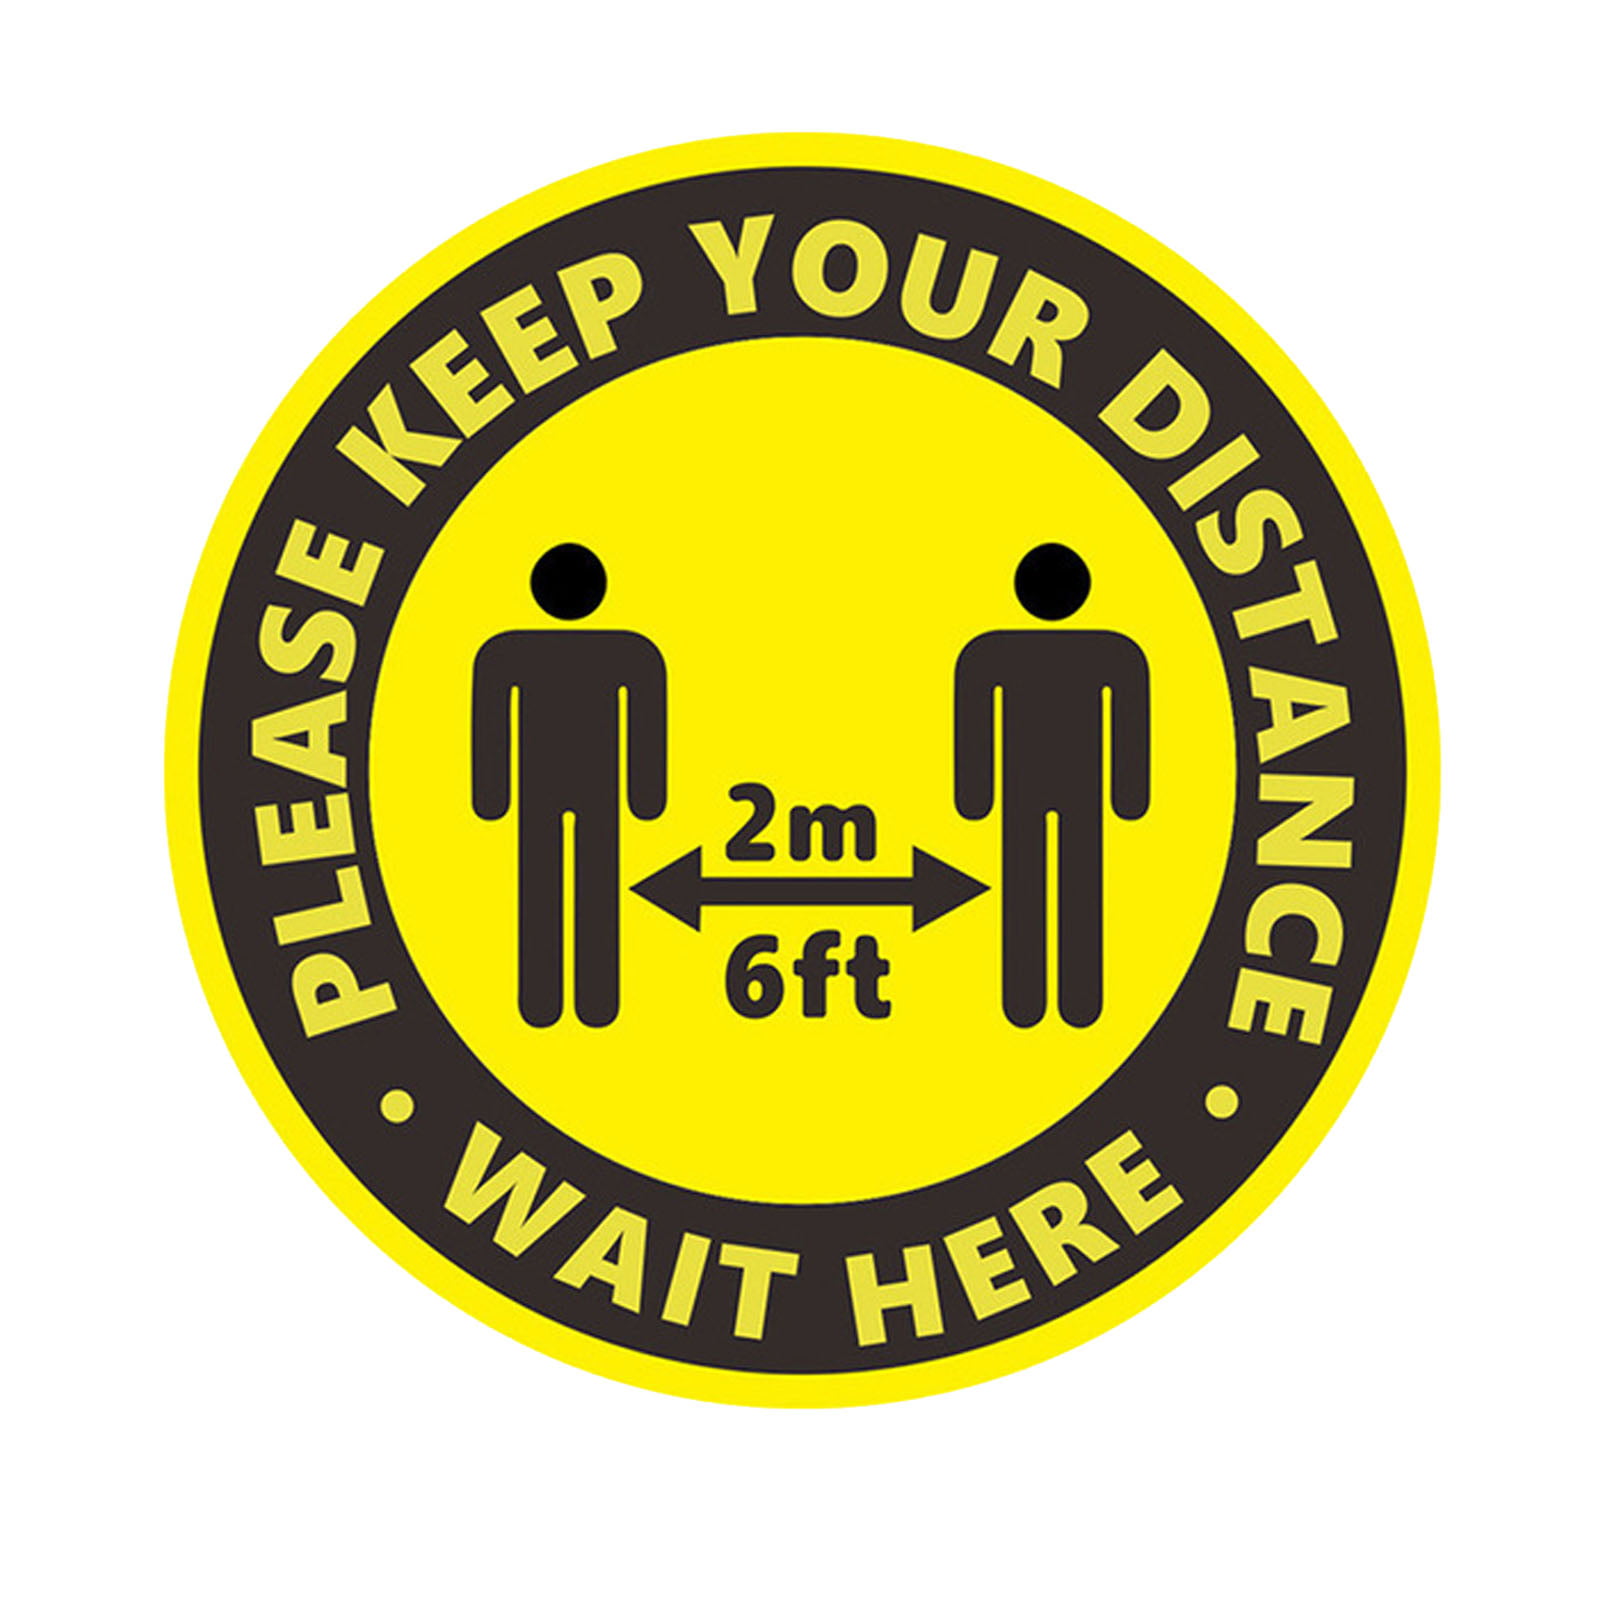 24 Social Distancing Stickers 2 meter spacing safety marker decal adhesive vinyl 